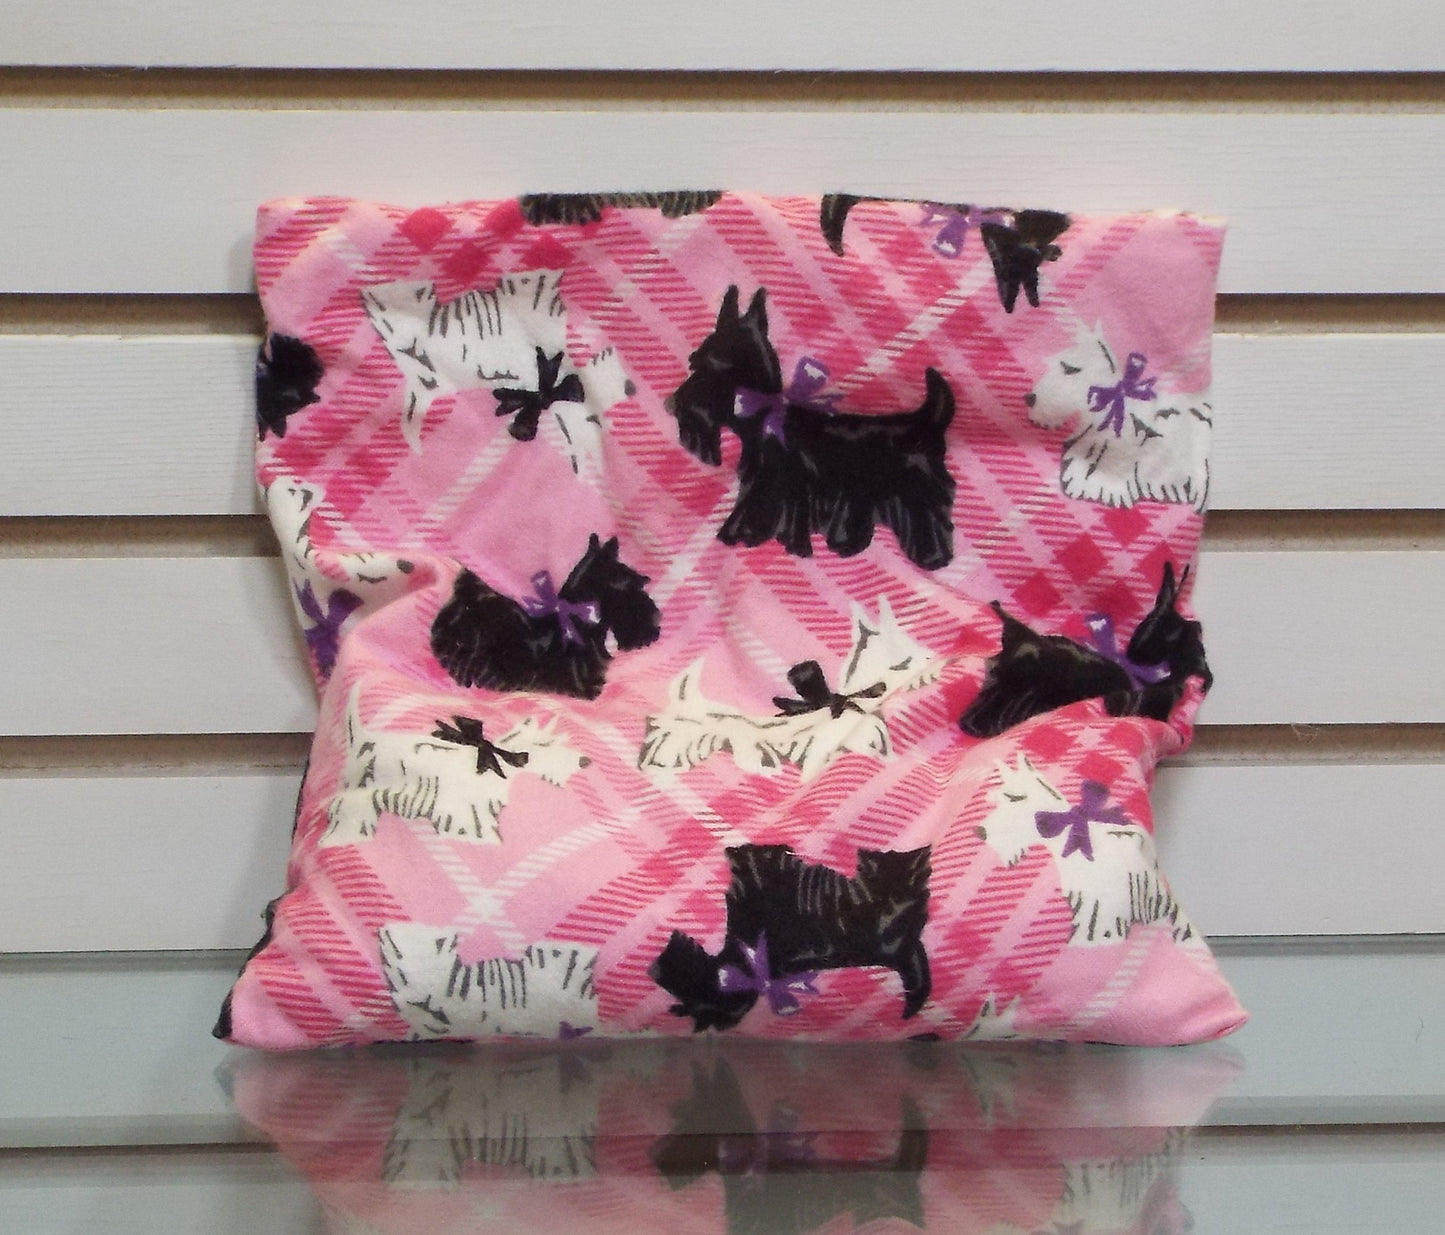 Pink tartan slip cover adorned with white West Highland Terriers and clack Scottish Terriers.